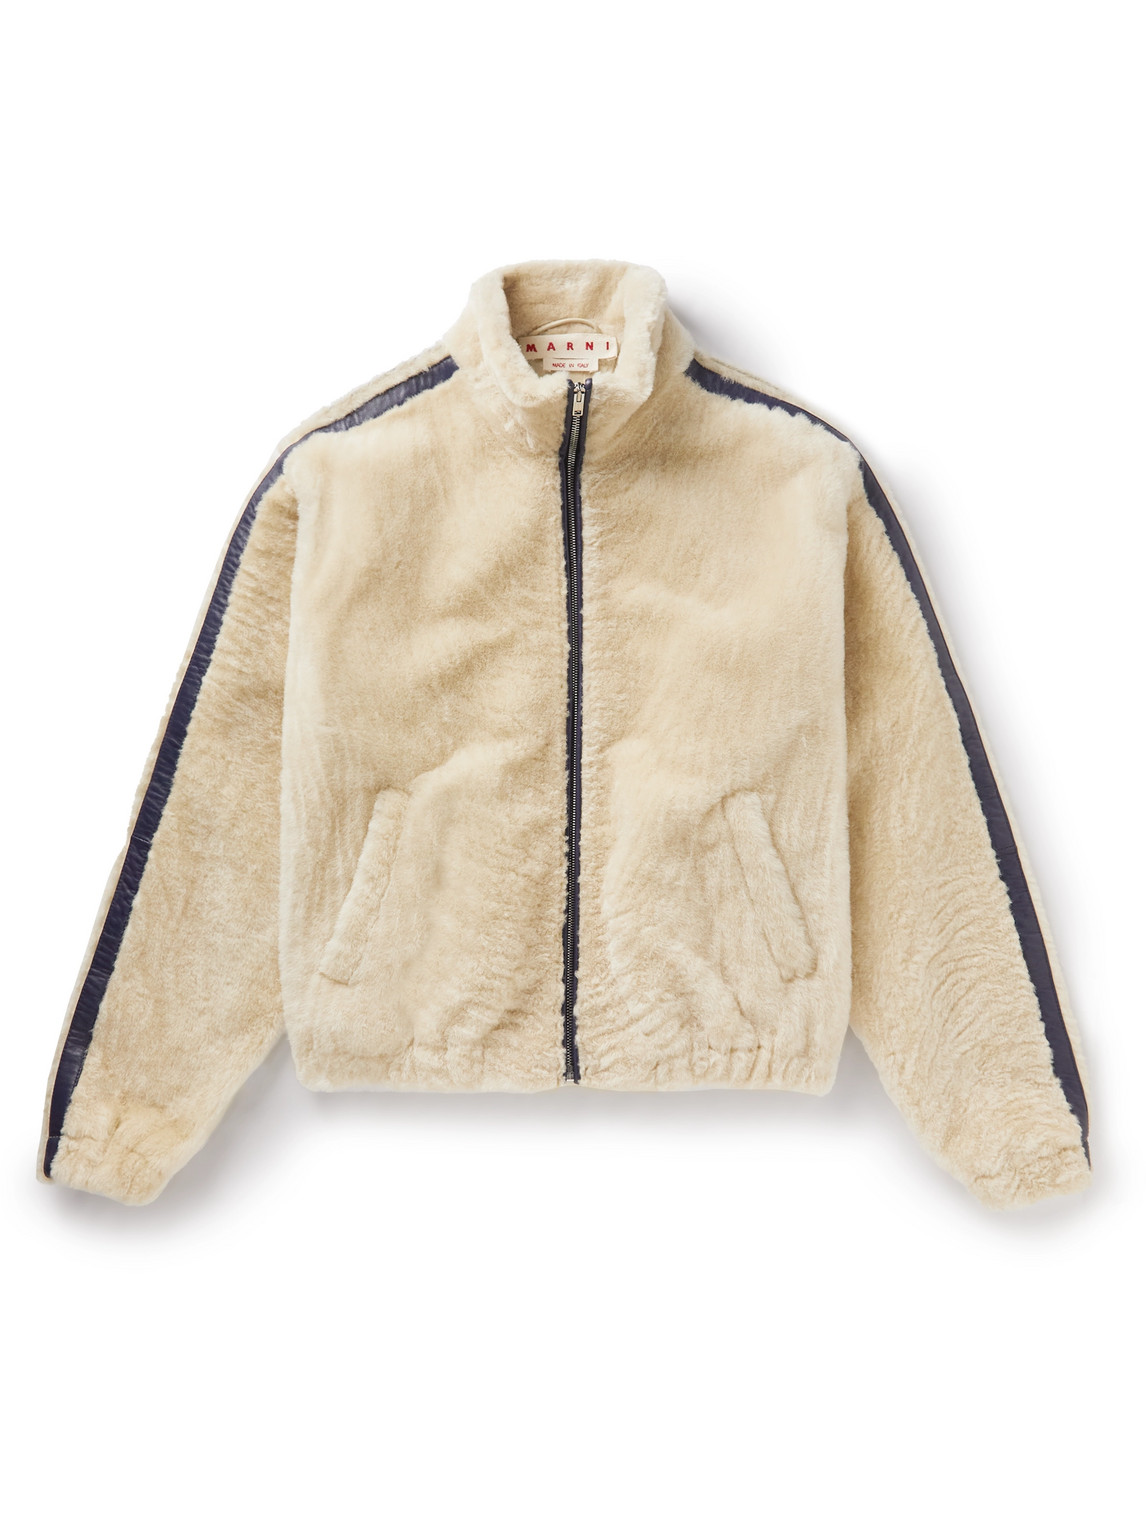 Marni Striped Leather-Trimmed Shearling Jacket